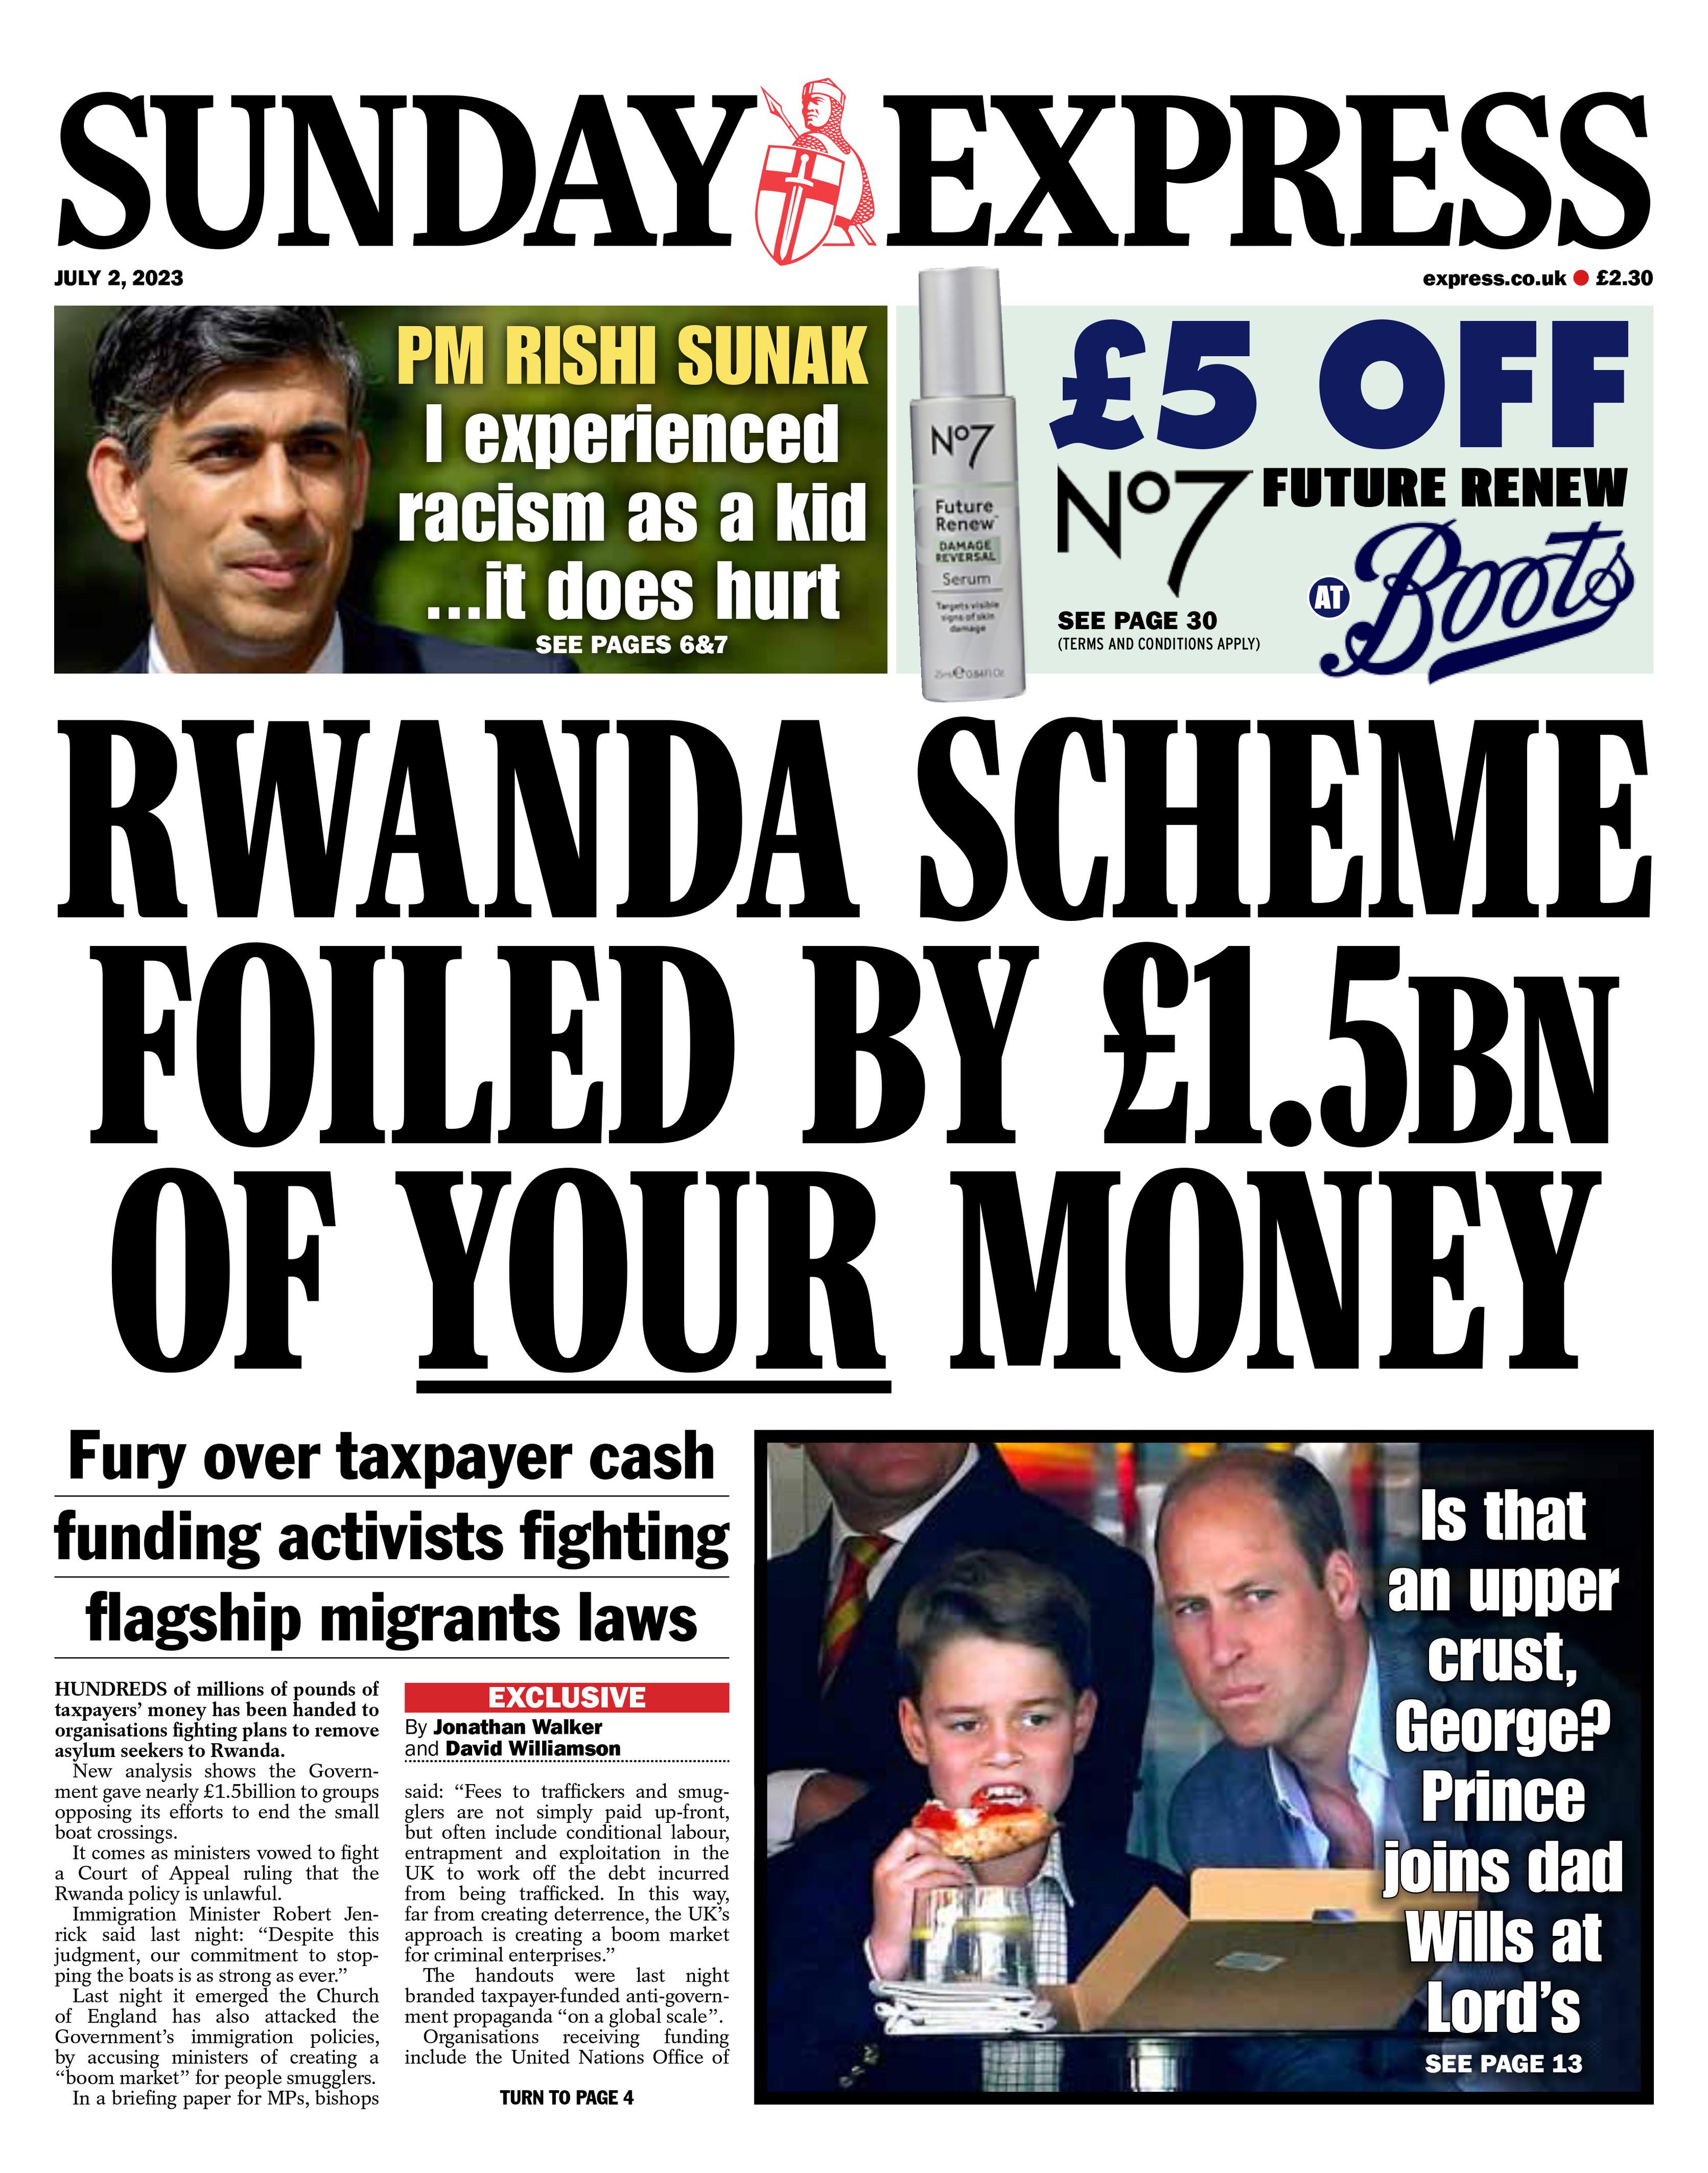 Front page: Rwanda scheme fouled by £1.5bn of your money #tomorrowspapertoday